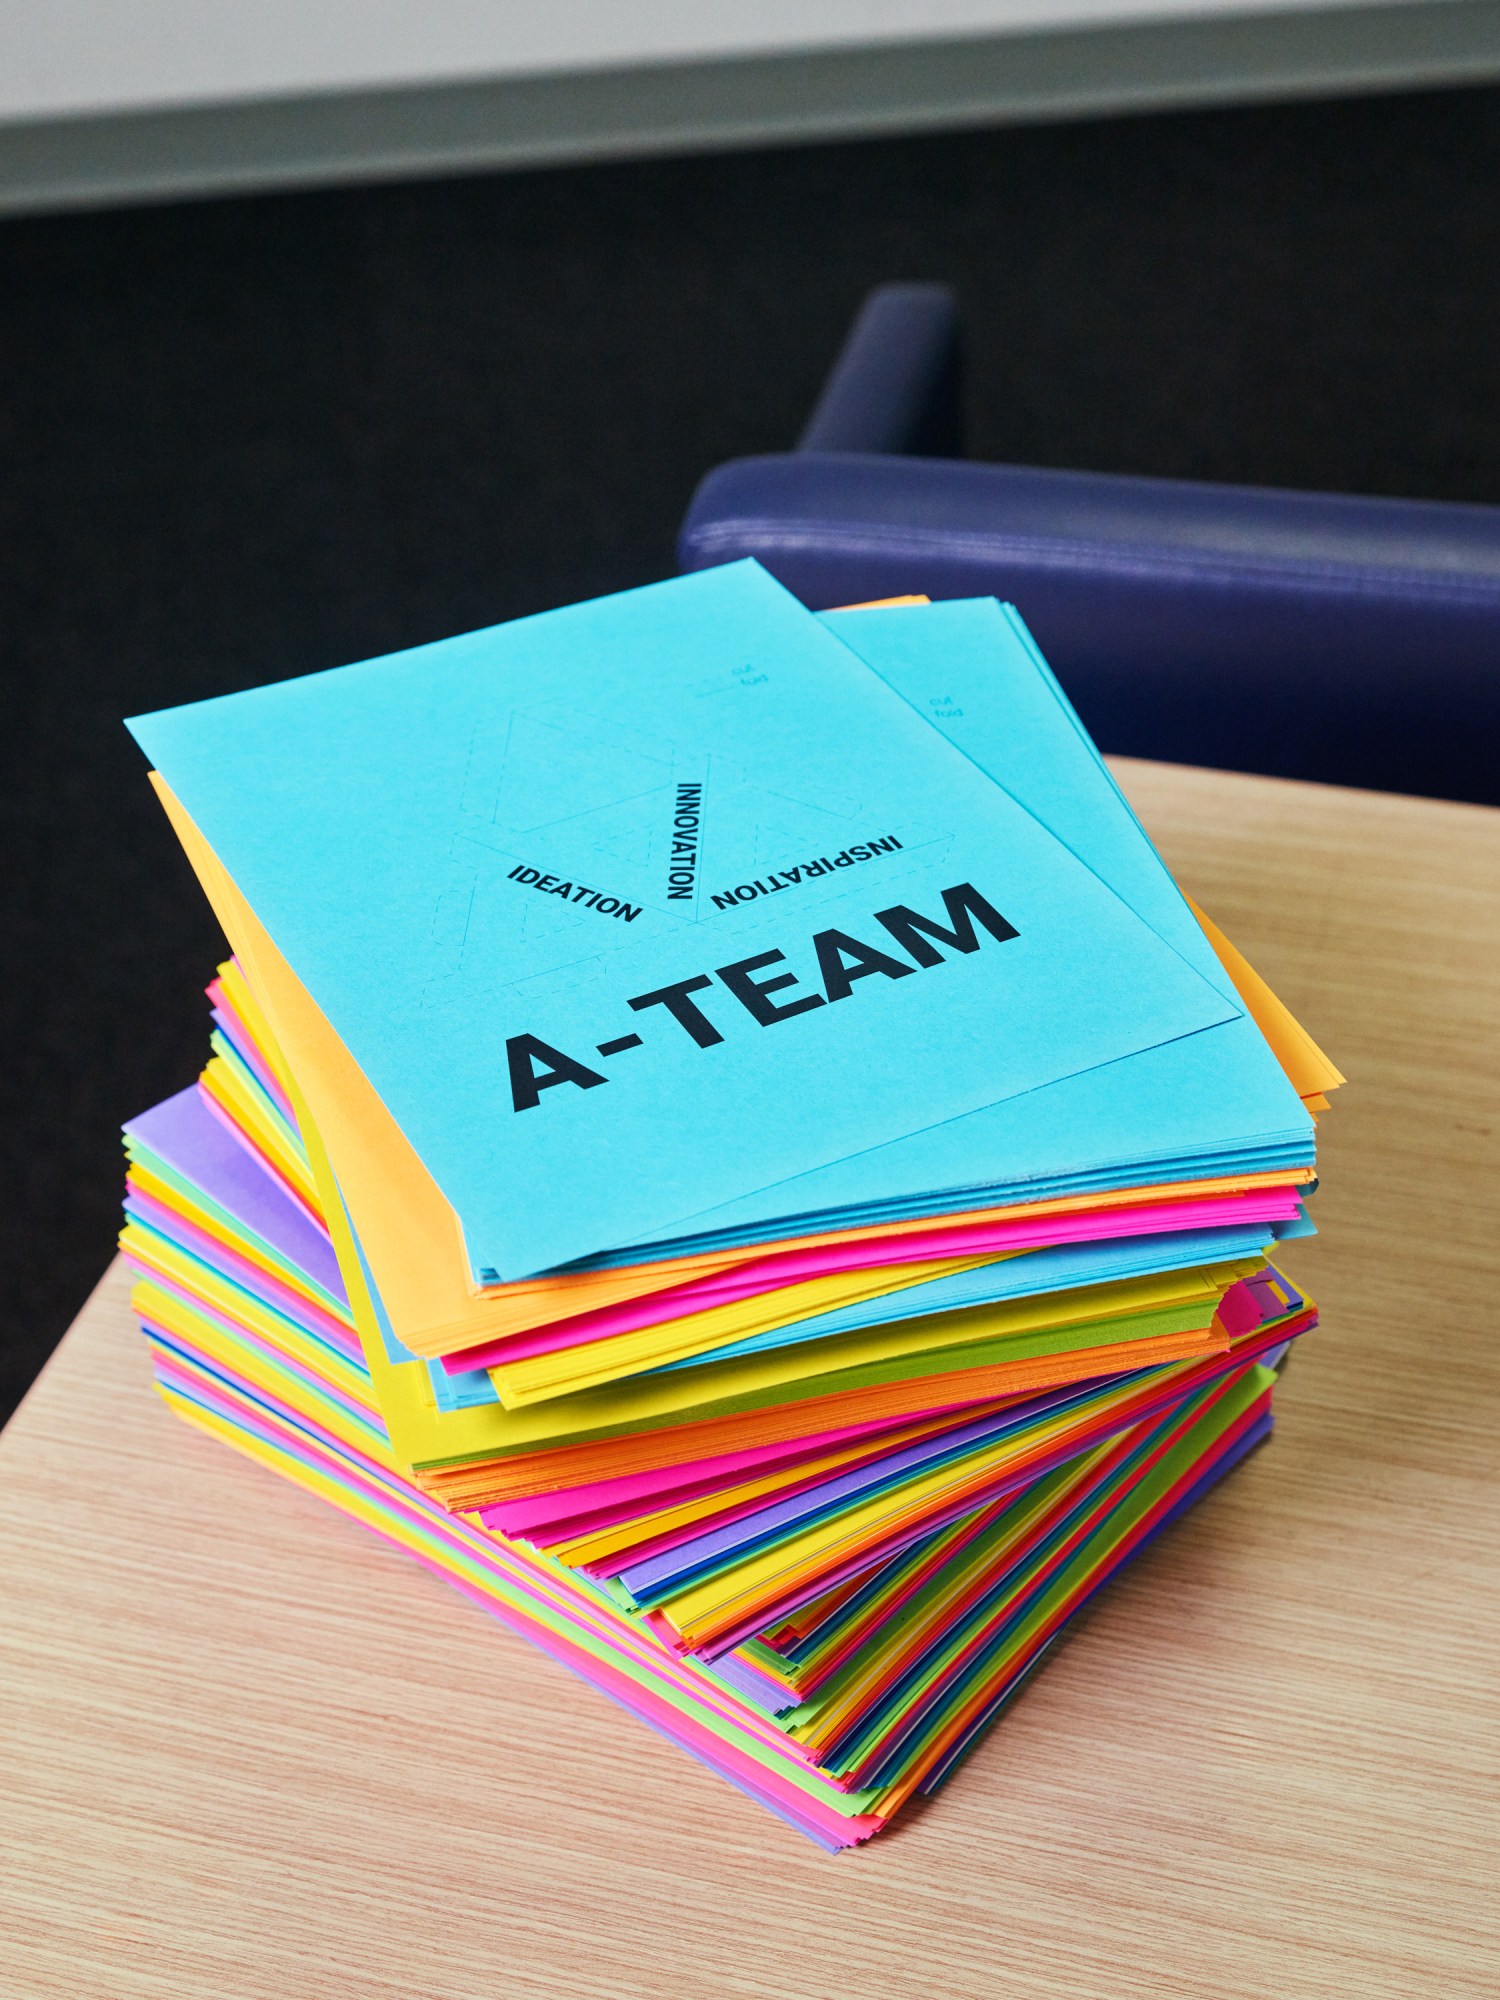 tall stack of florescent colored cards that read "A-Team"